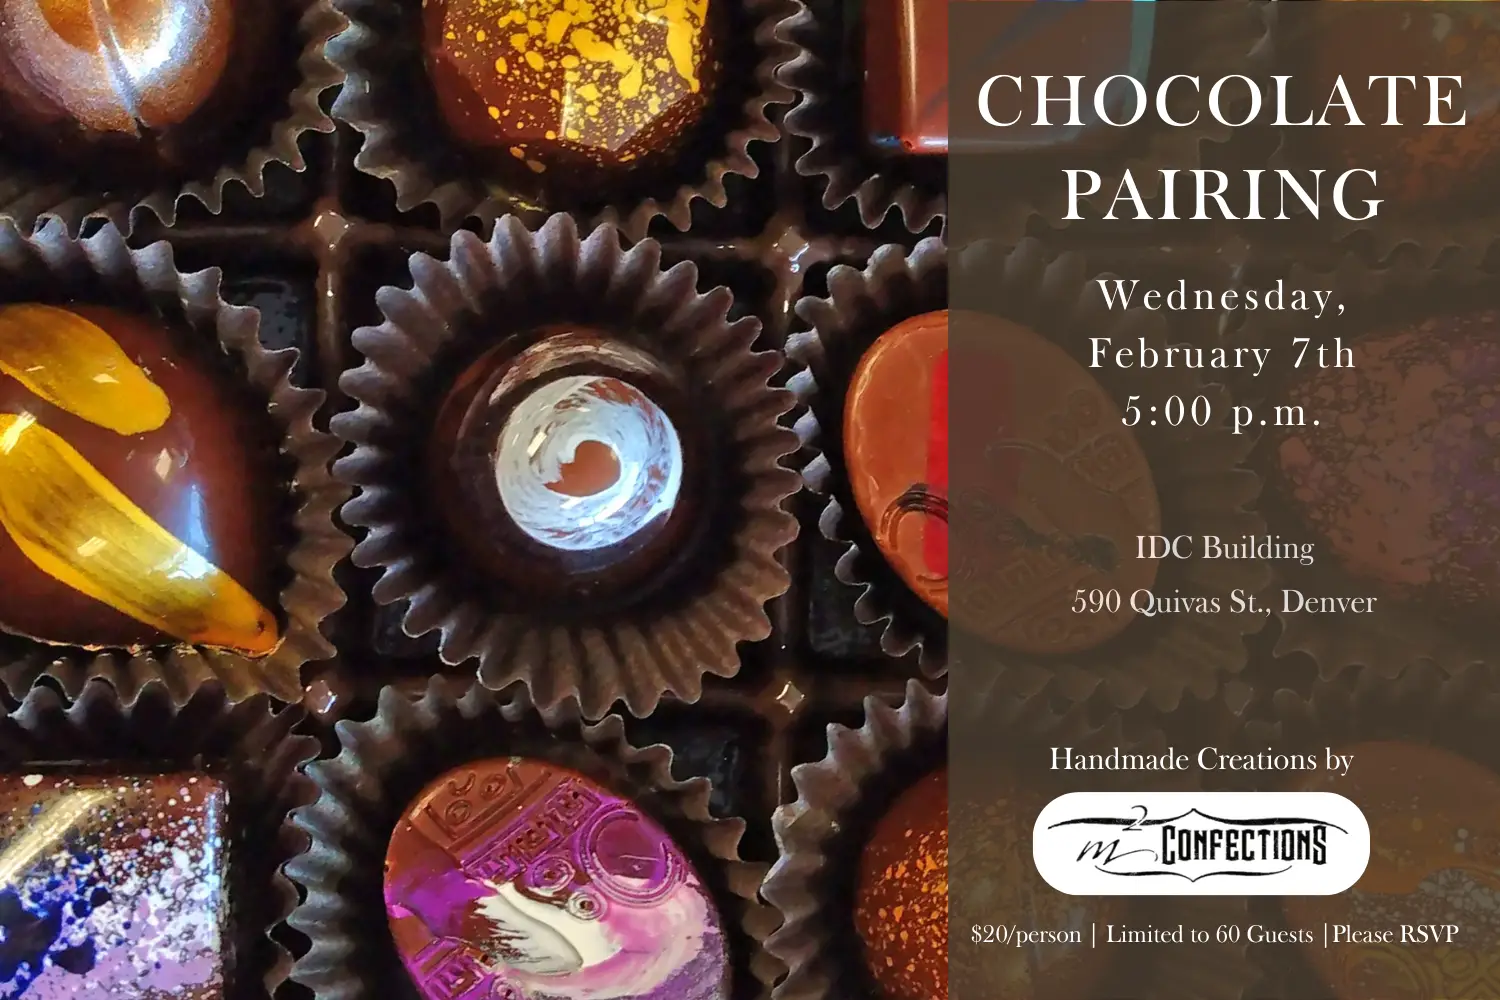 Chocolate Pairing at the IDC Building